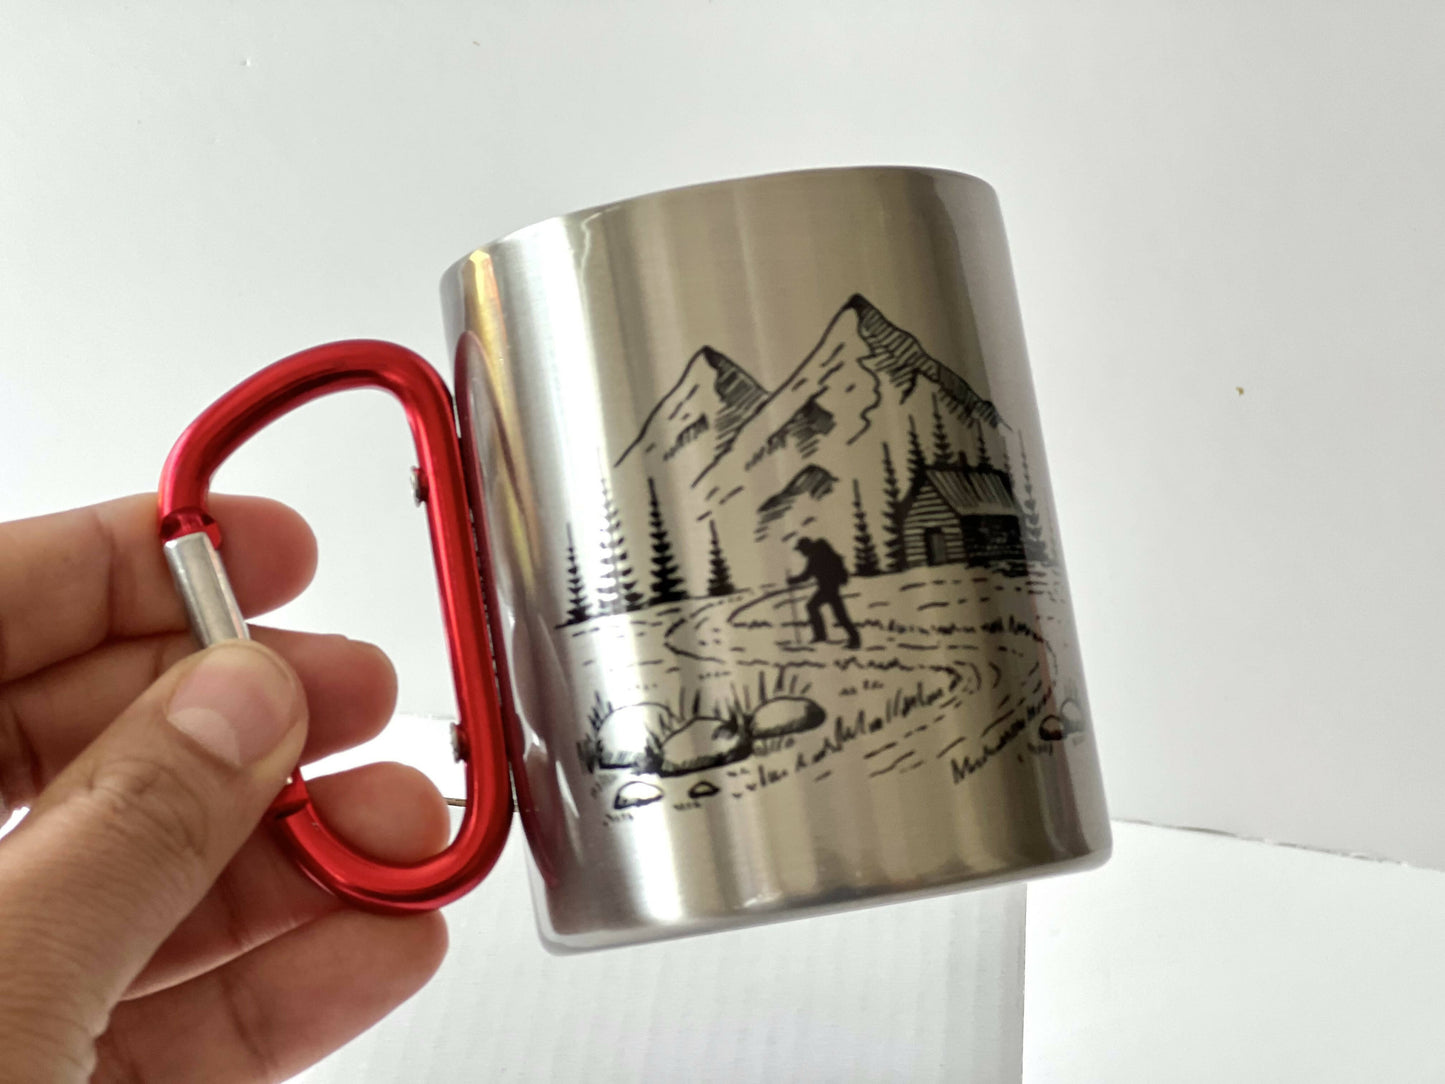 Stainless steel mug with red carabiner clip